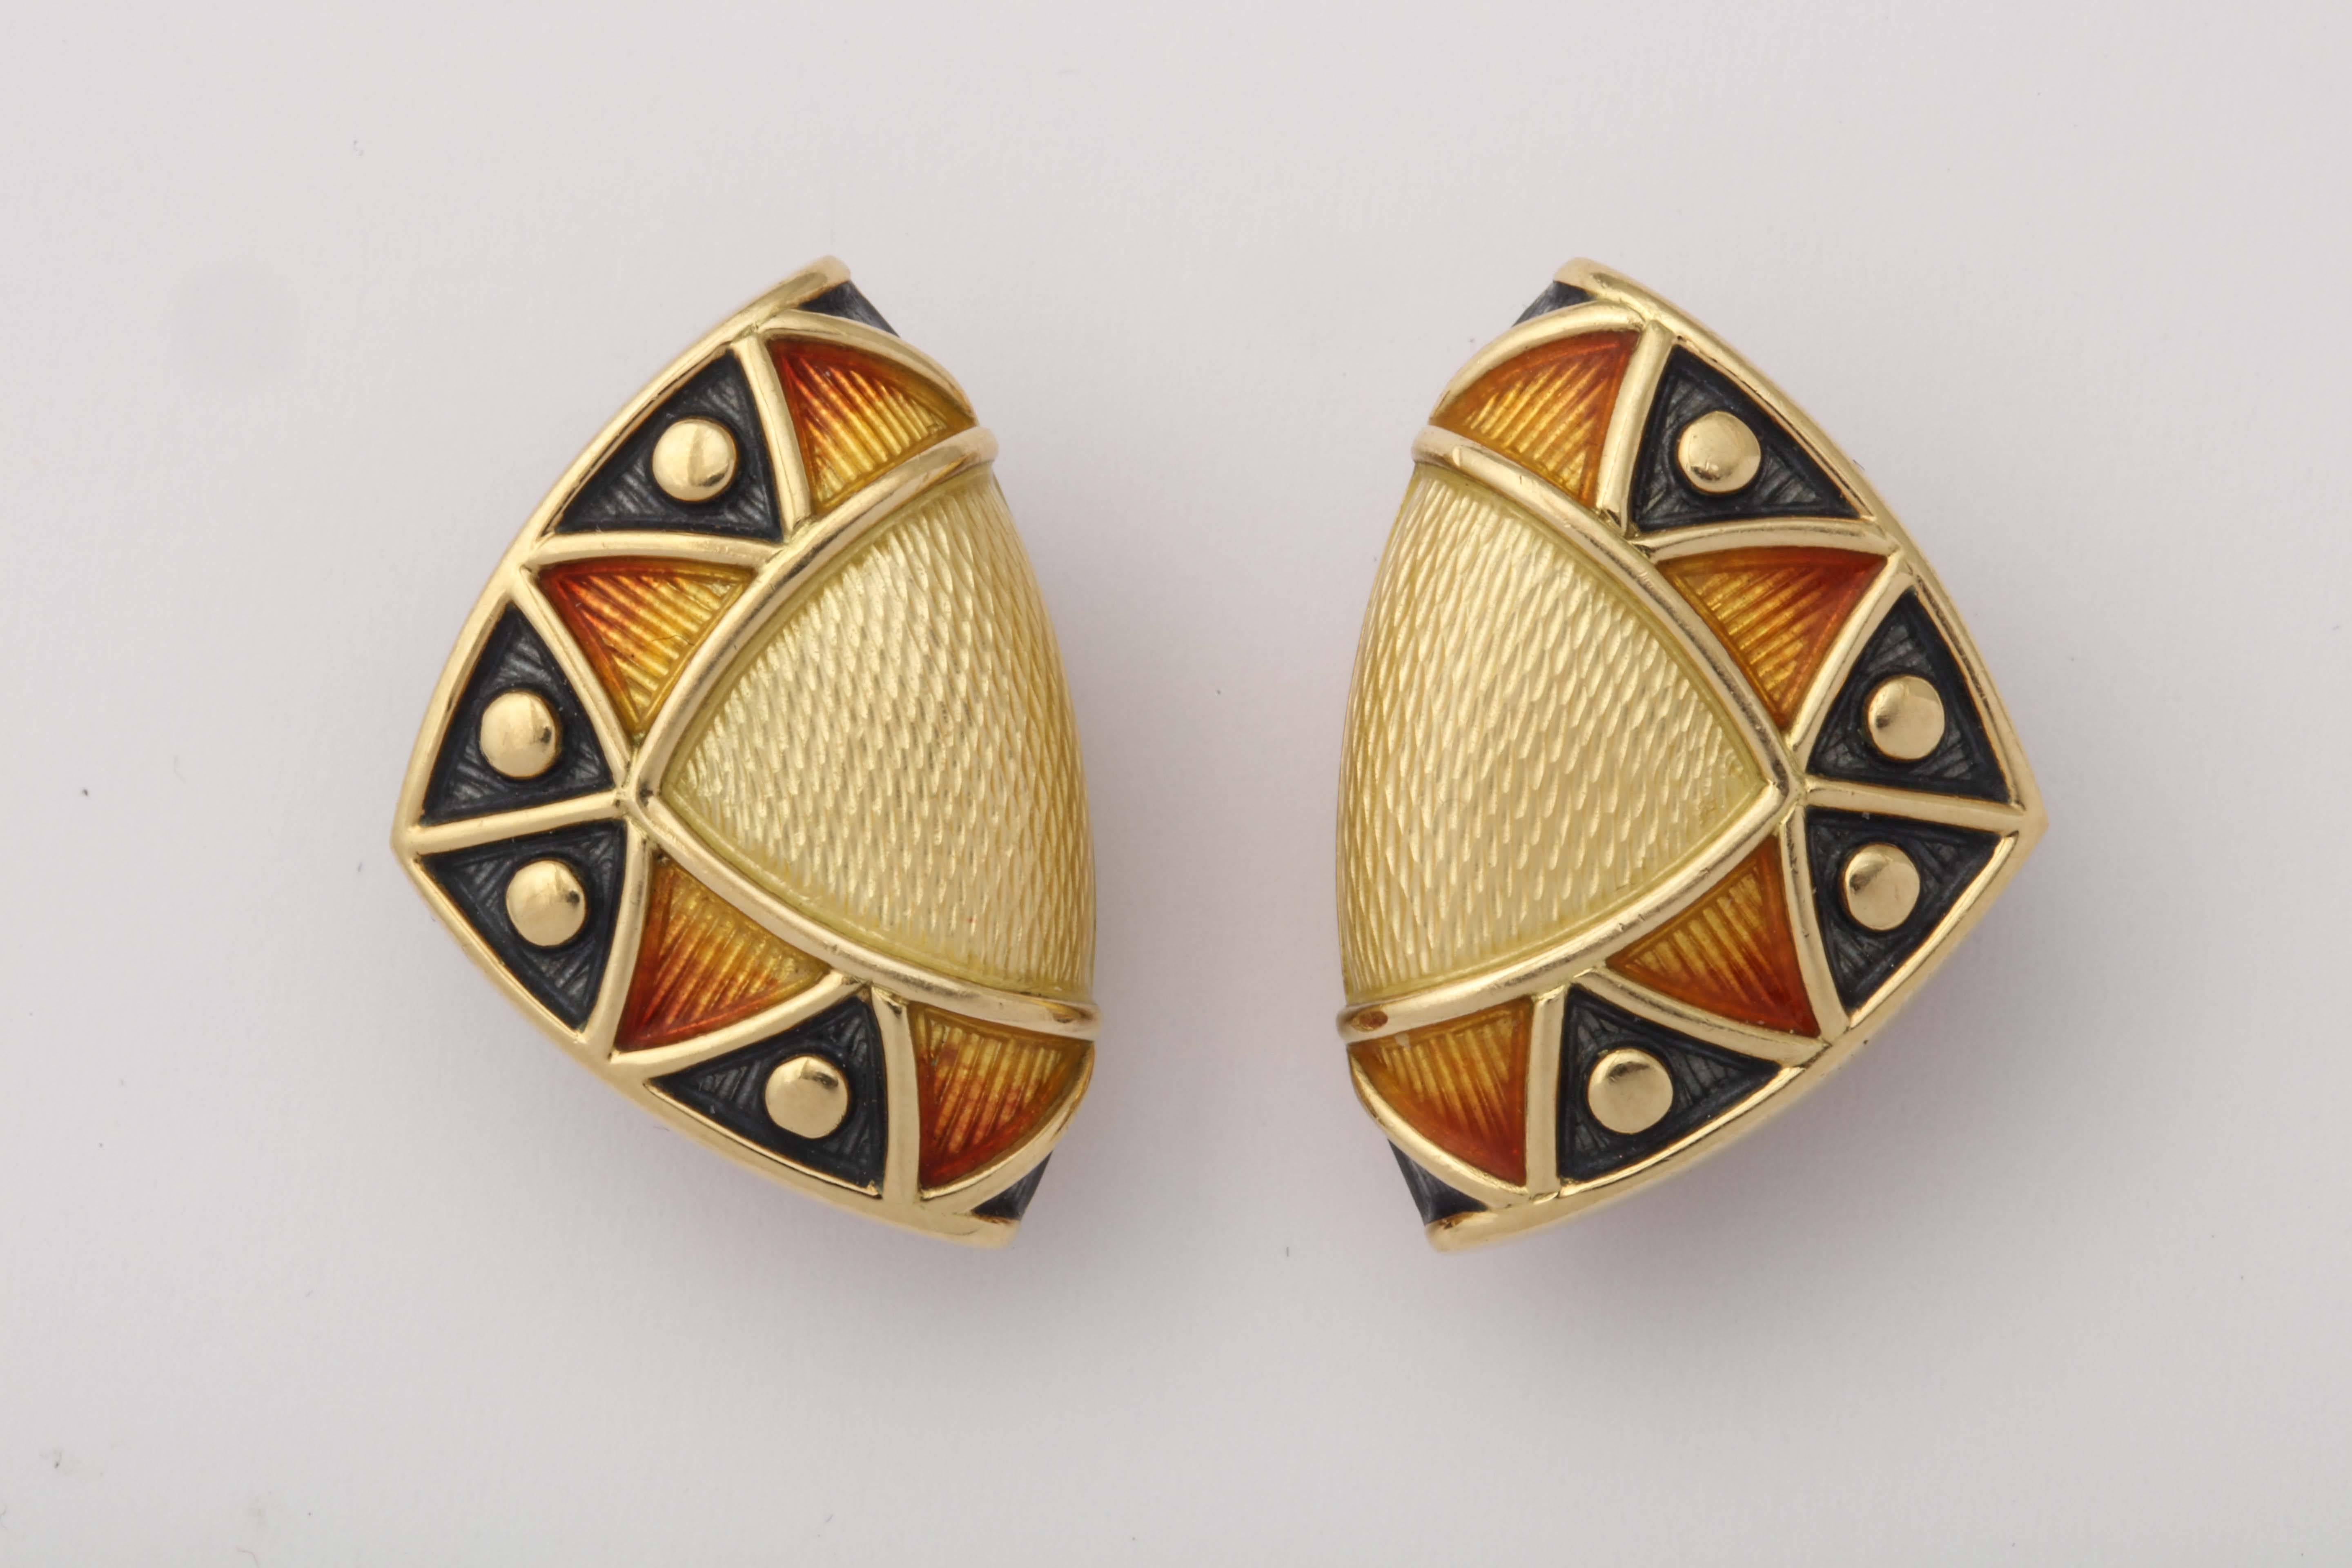 One Pair Of Ladies Amber Color With Yellow Guilloche Enamel Shield Shape Earclips Designed With 18kt Yellow Gold Pellets Thruout Design Of The Earrings. Featuring High Quality Clip-On Backs. NOTE: Posts May Be Added For Pierced Ears. Created By De